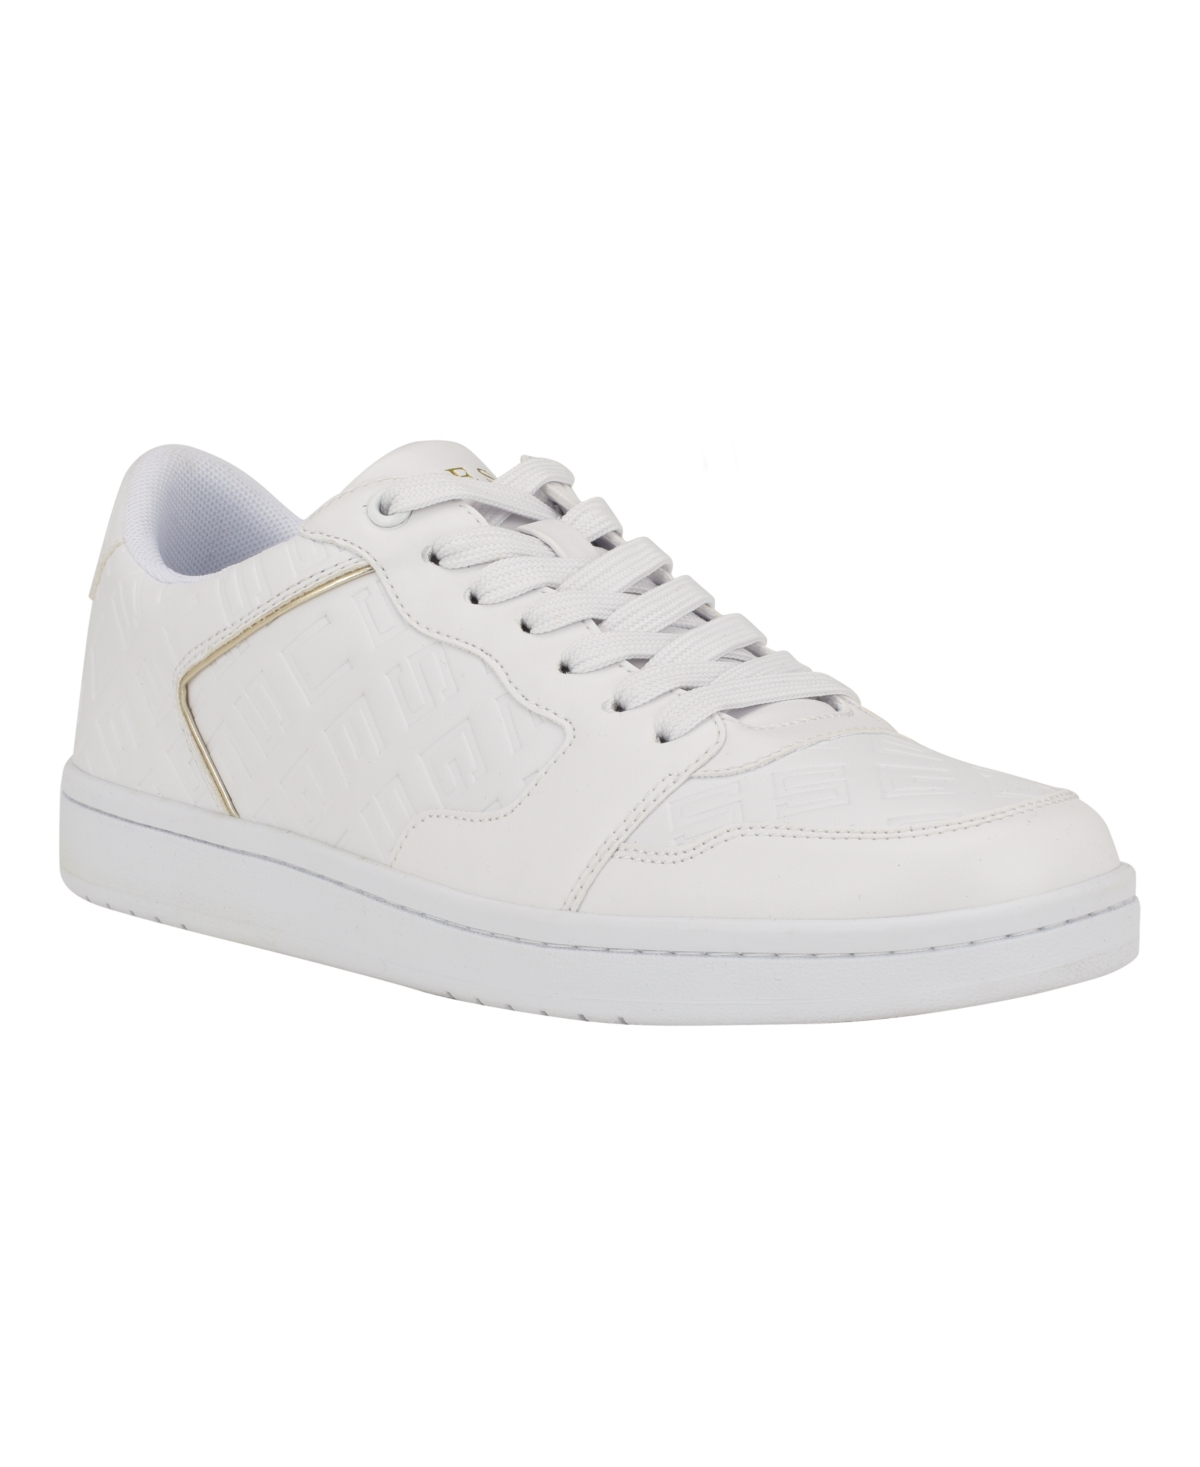 Guess Men's Loovie Low Top Lace Up Casual Sneakers In White,gold Logo Multi